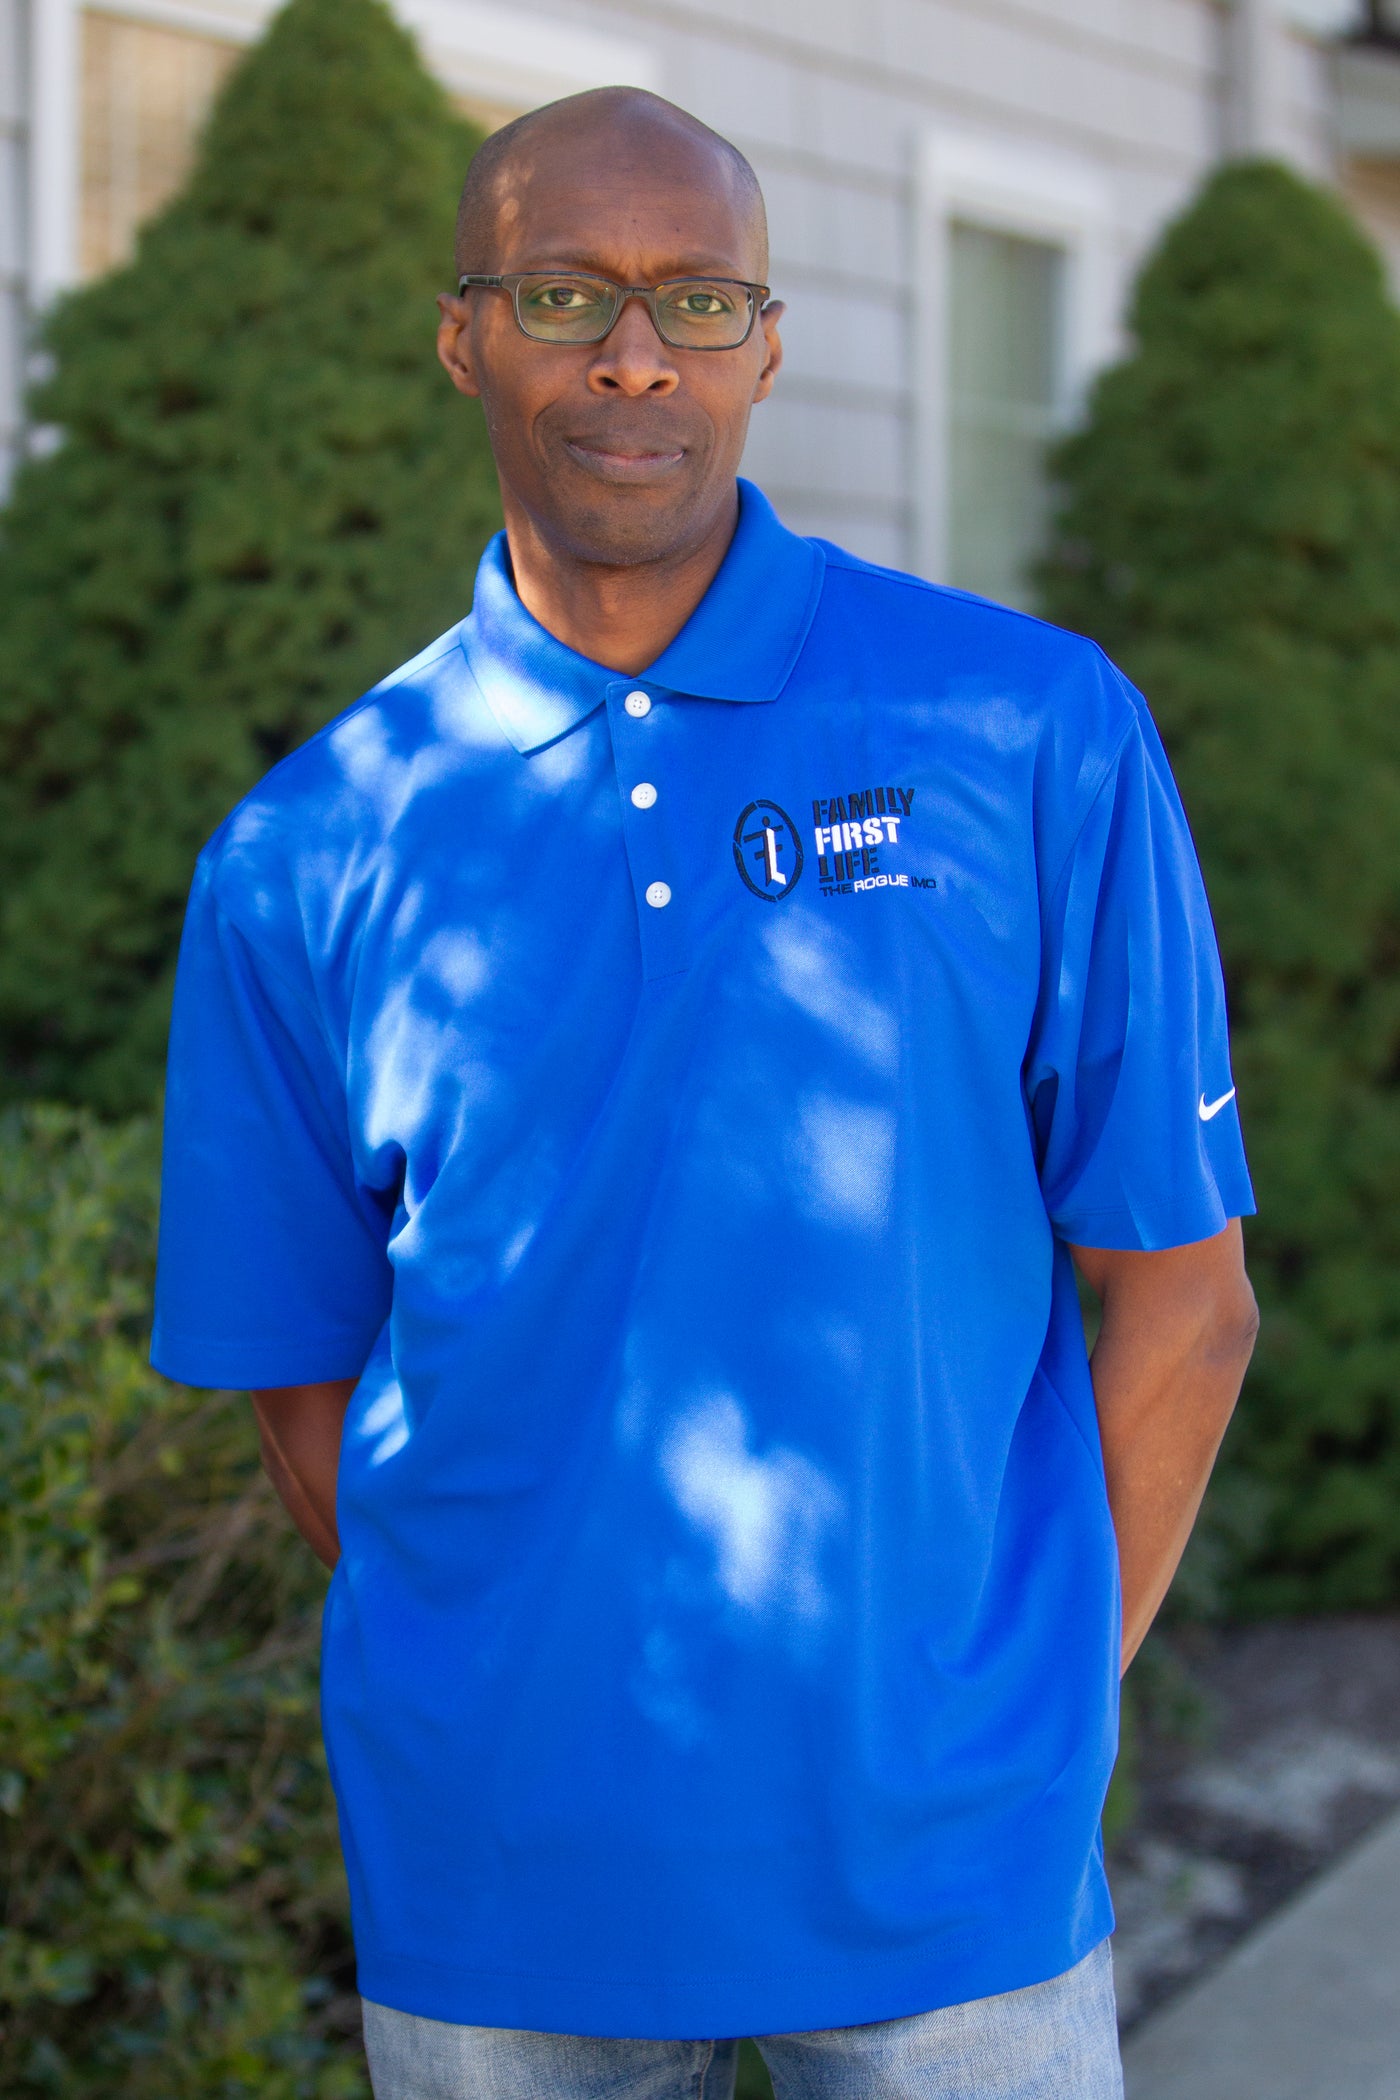 Men's Nike Polo: Sapphire Blue (Discontinued)